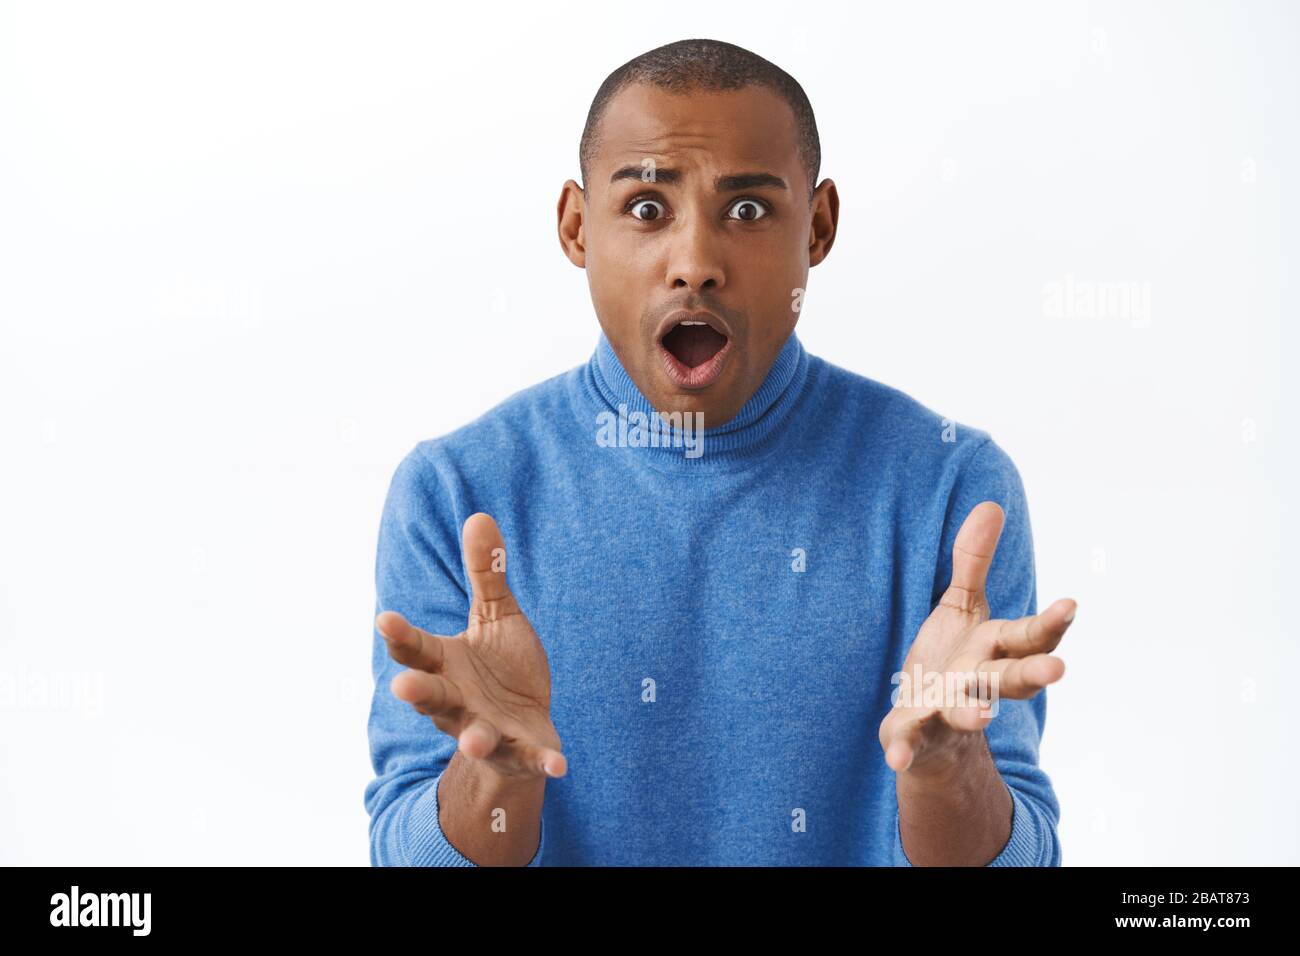 Close-up portrait of shocked, young frustrated african american adult man looking with desperate sad face at camera, raising hands in dismay, trying Stock Photo